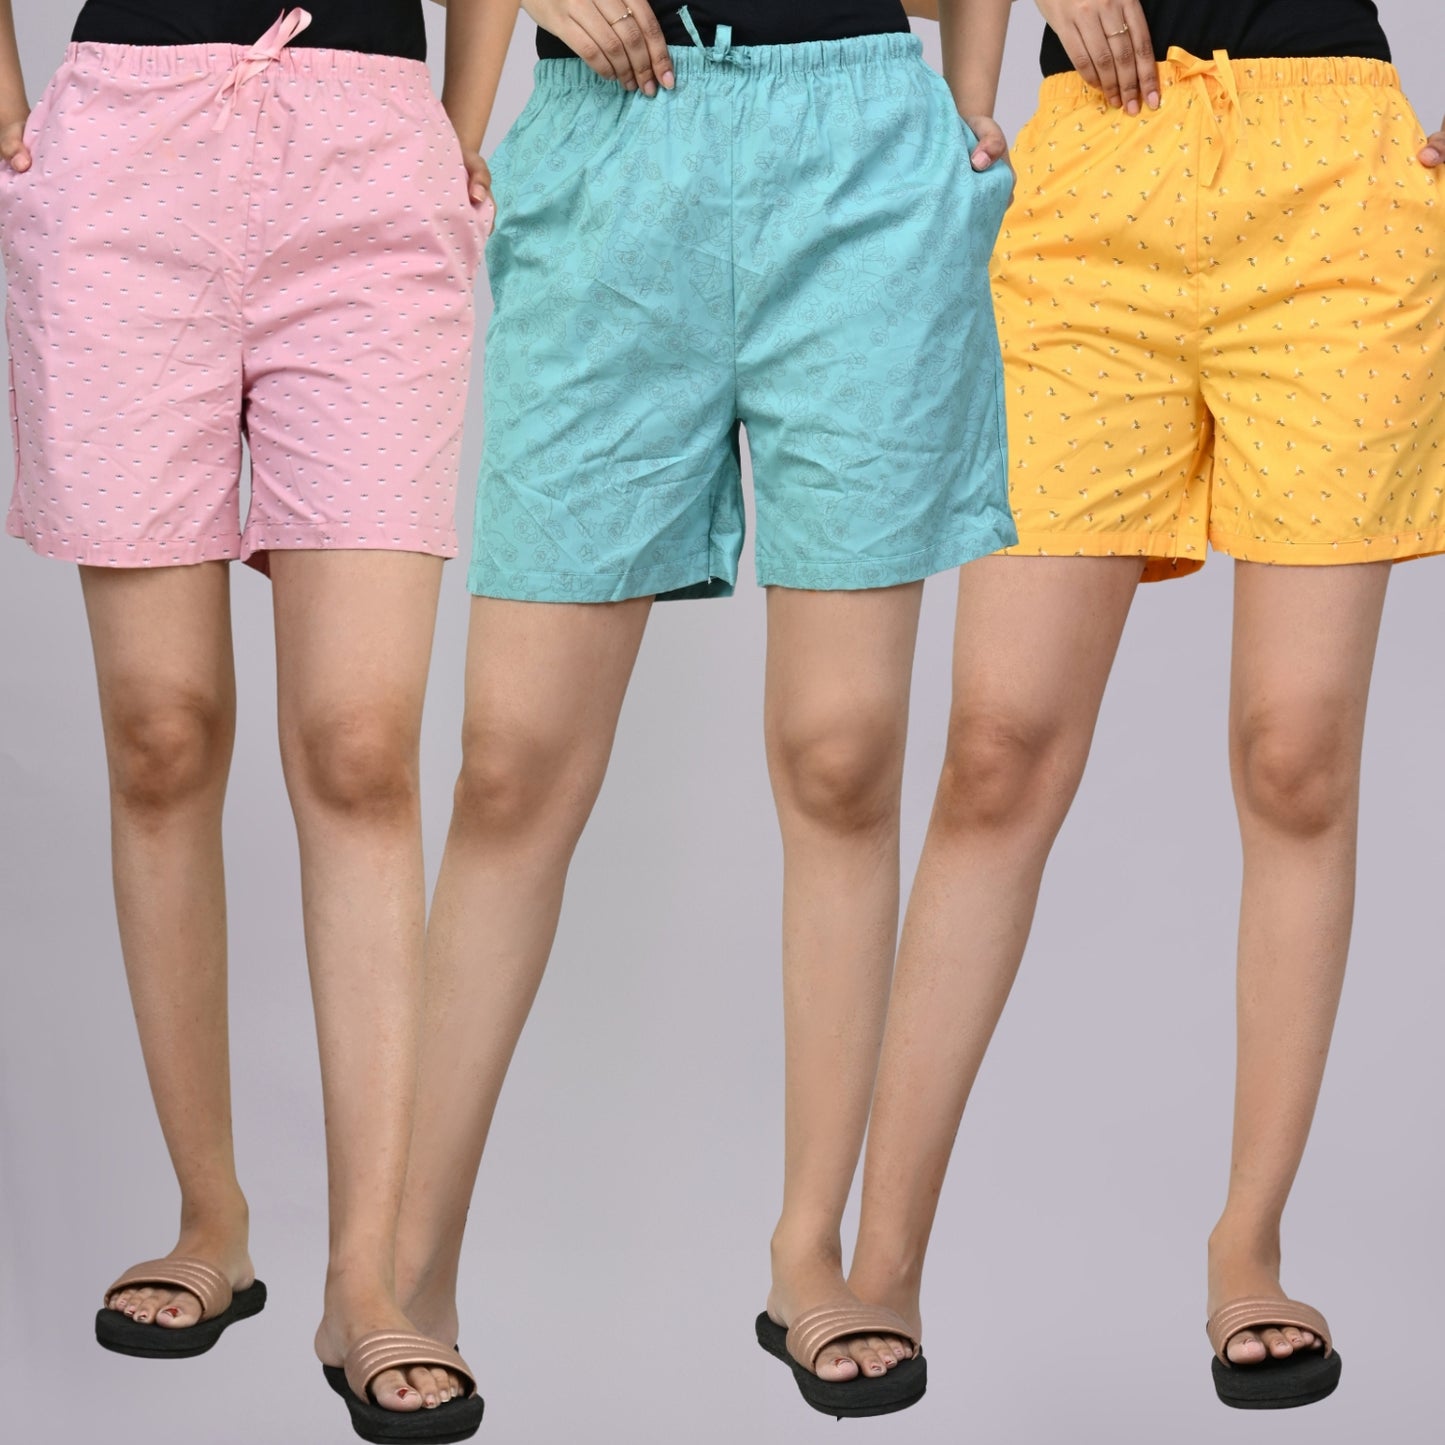 Pack Of 3 Pink, Sky Blue And Yellow Printed Women Shorts Combo